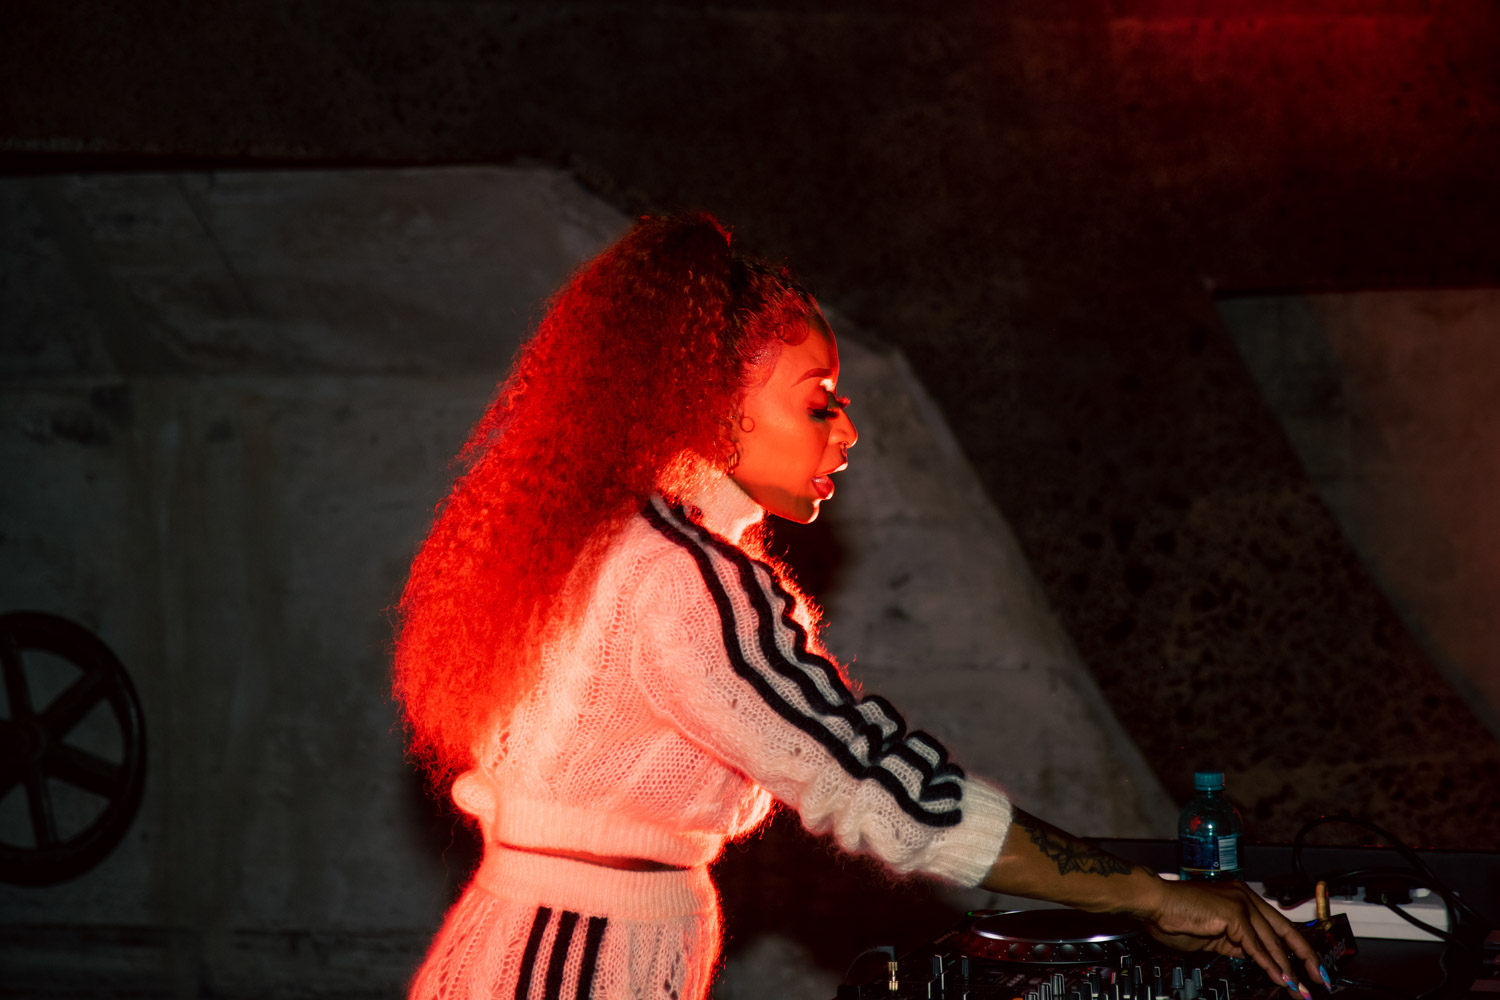 Headlining act DJ Zinhle kept guests entertained well into the night